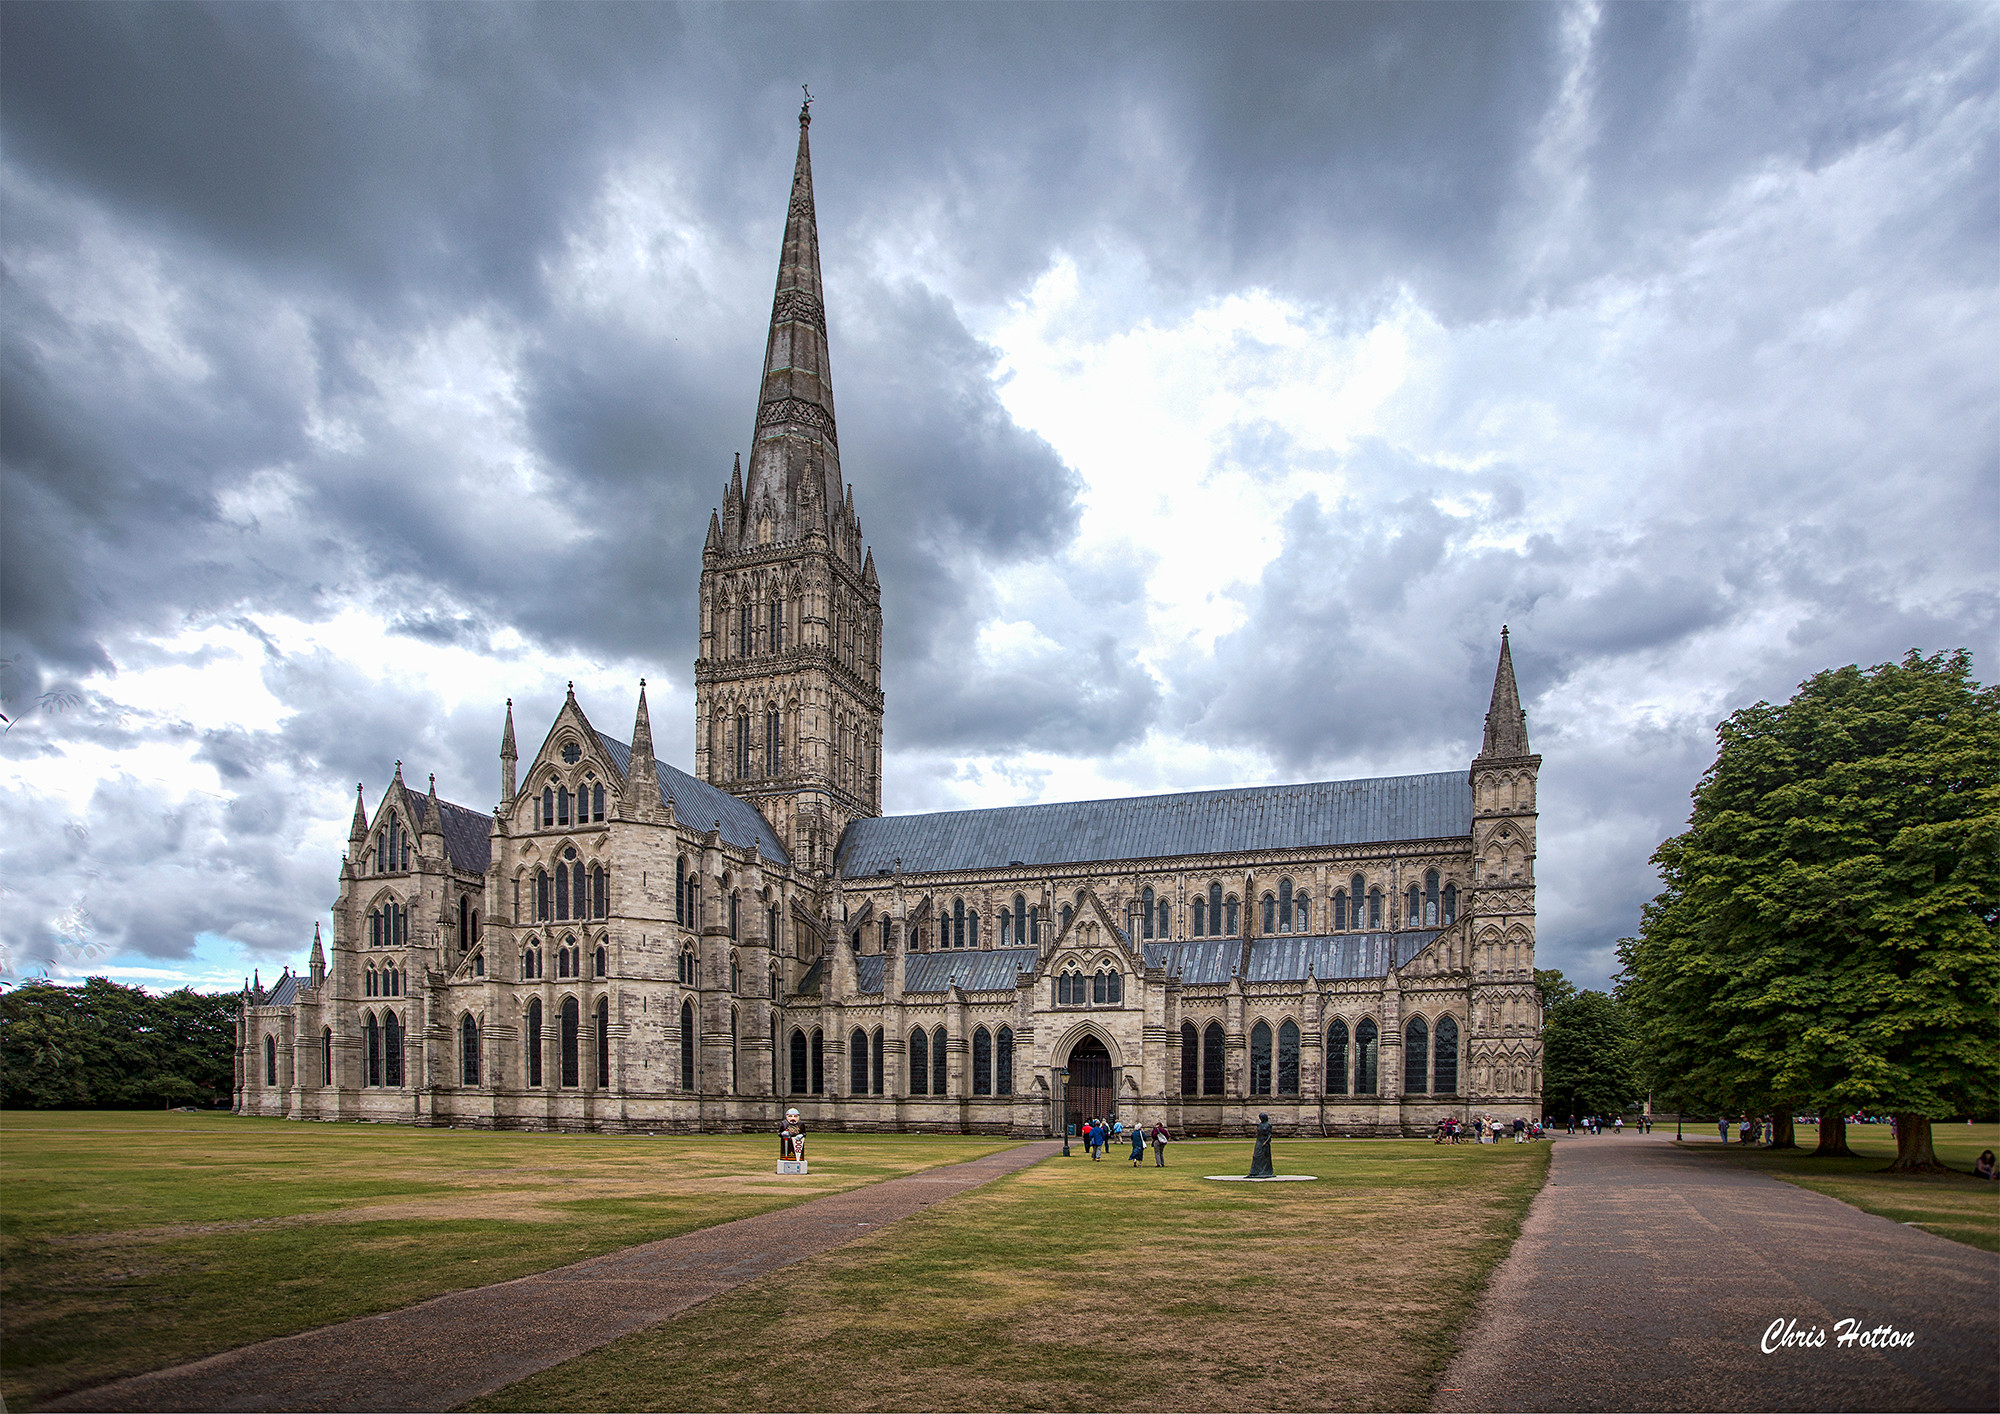 Five English cathedrals that are architectural treasures, chosen by Antic Disposition